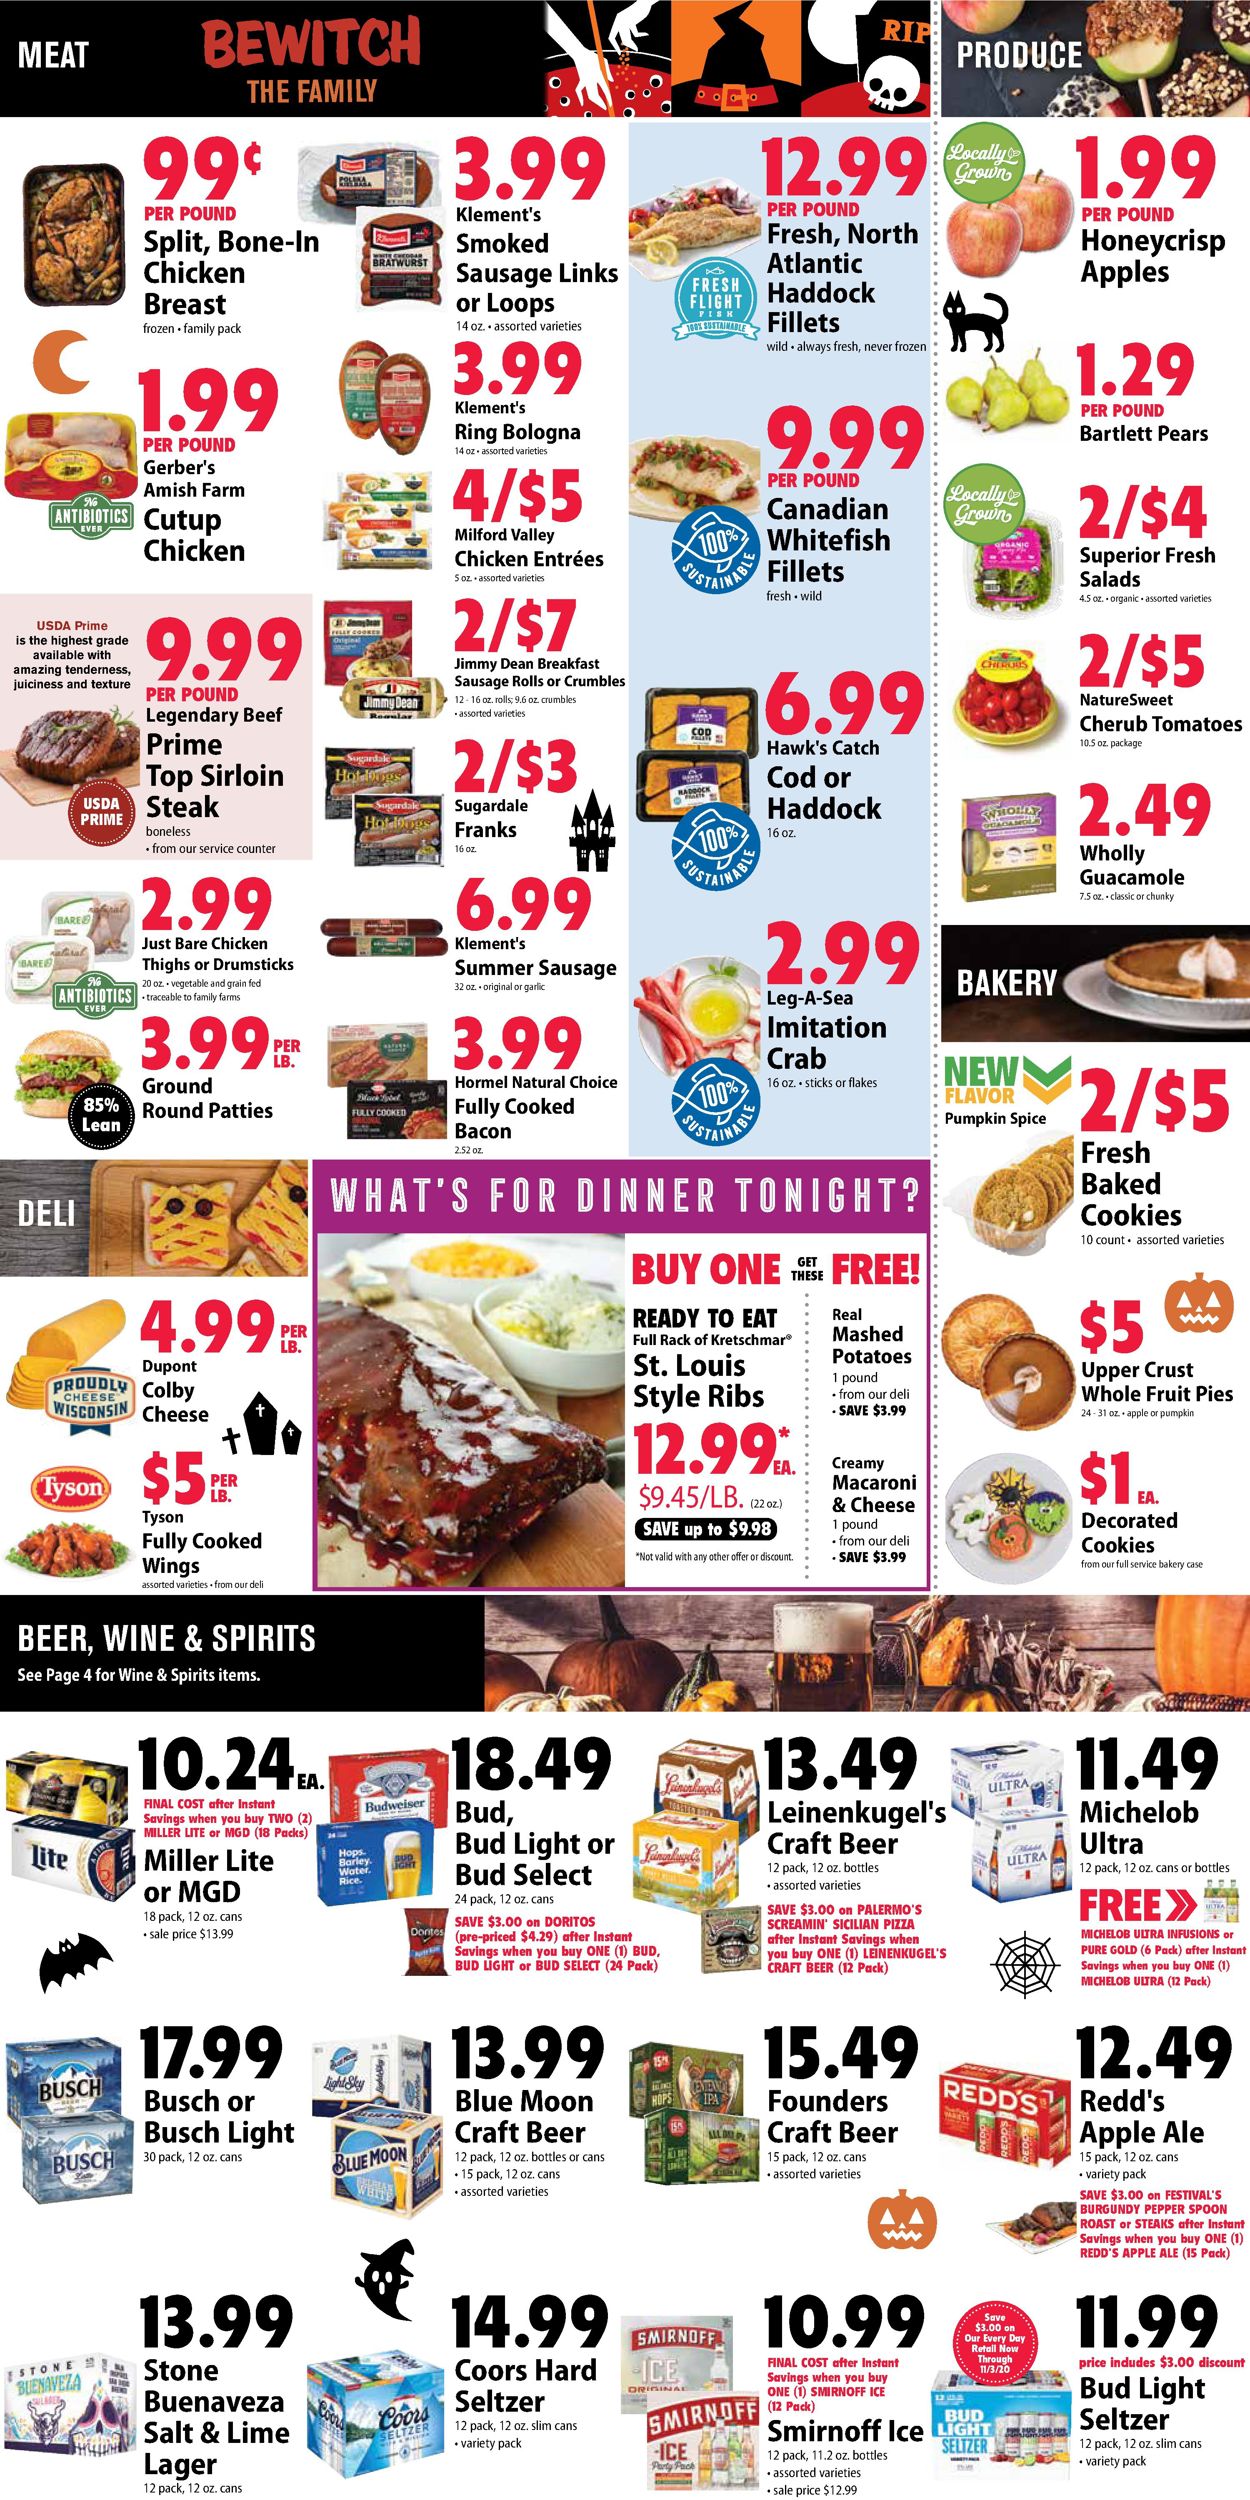 Festival Foods Current weekly ad 10/28 - 11/03/2020 [4] - frequent-ads.com